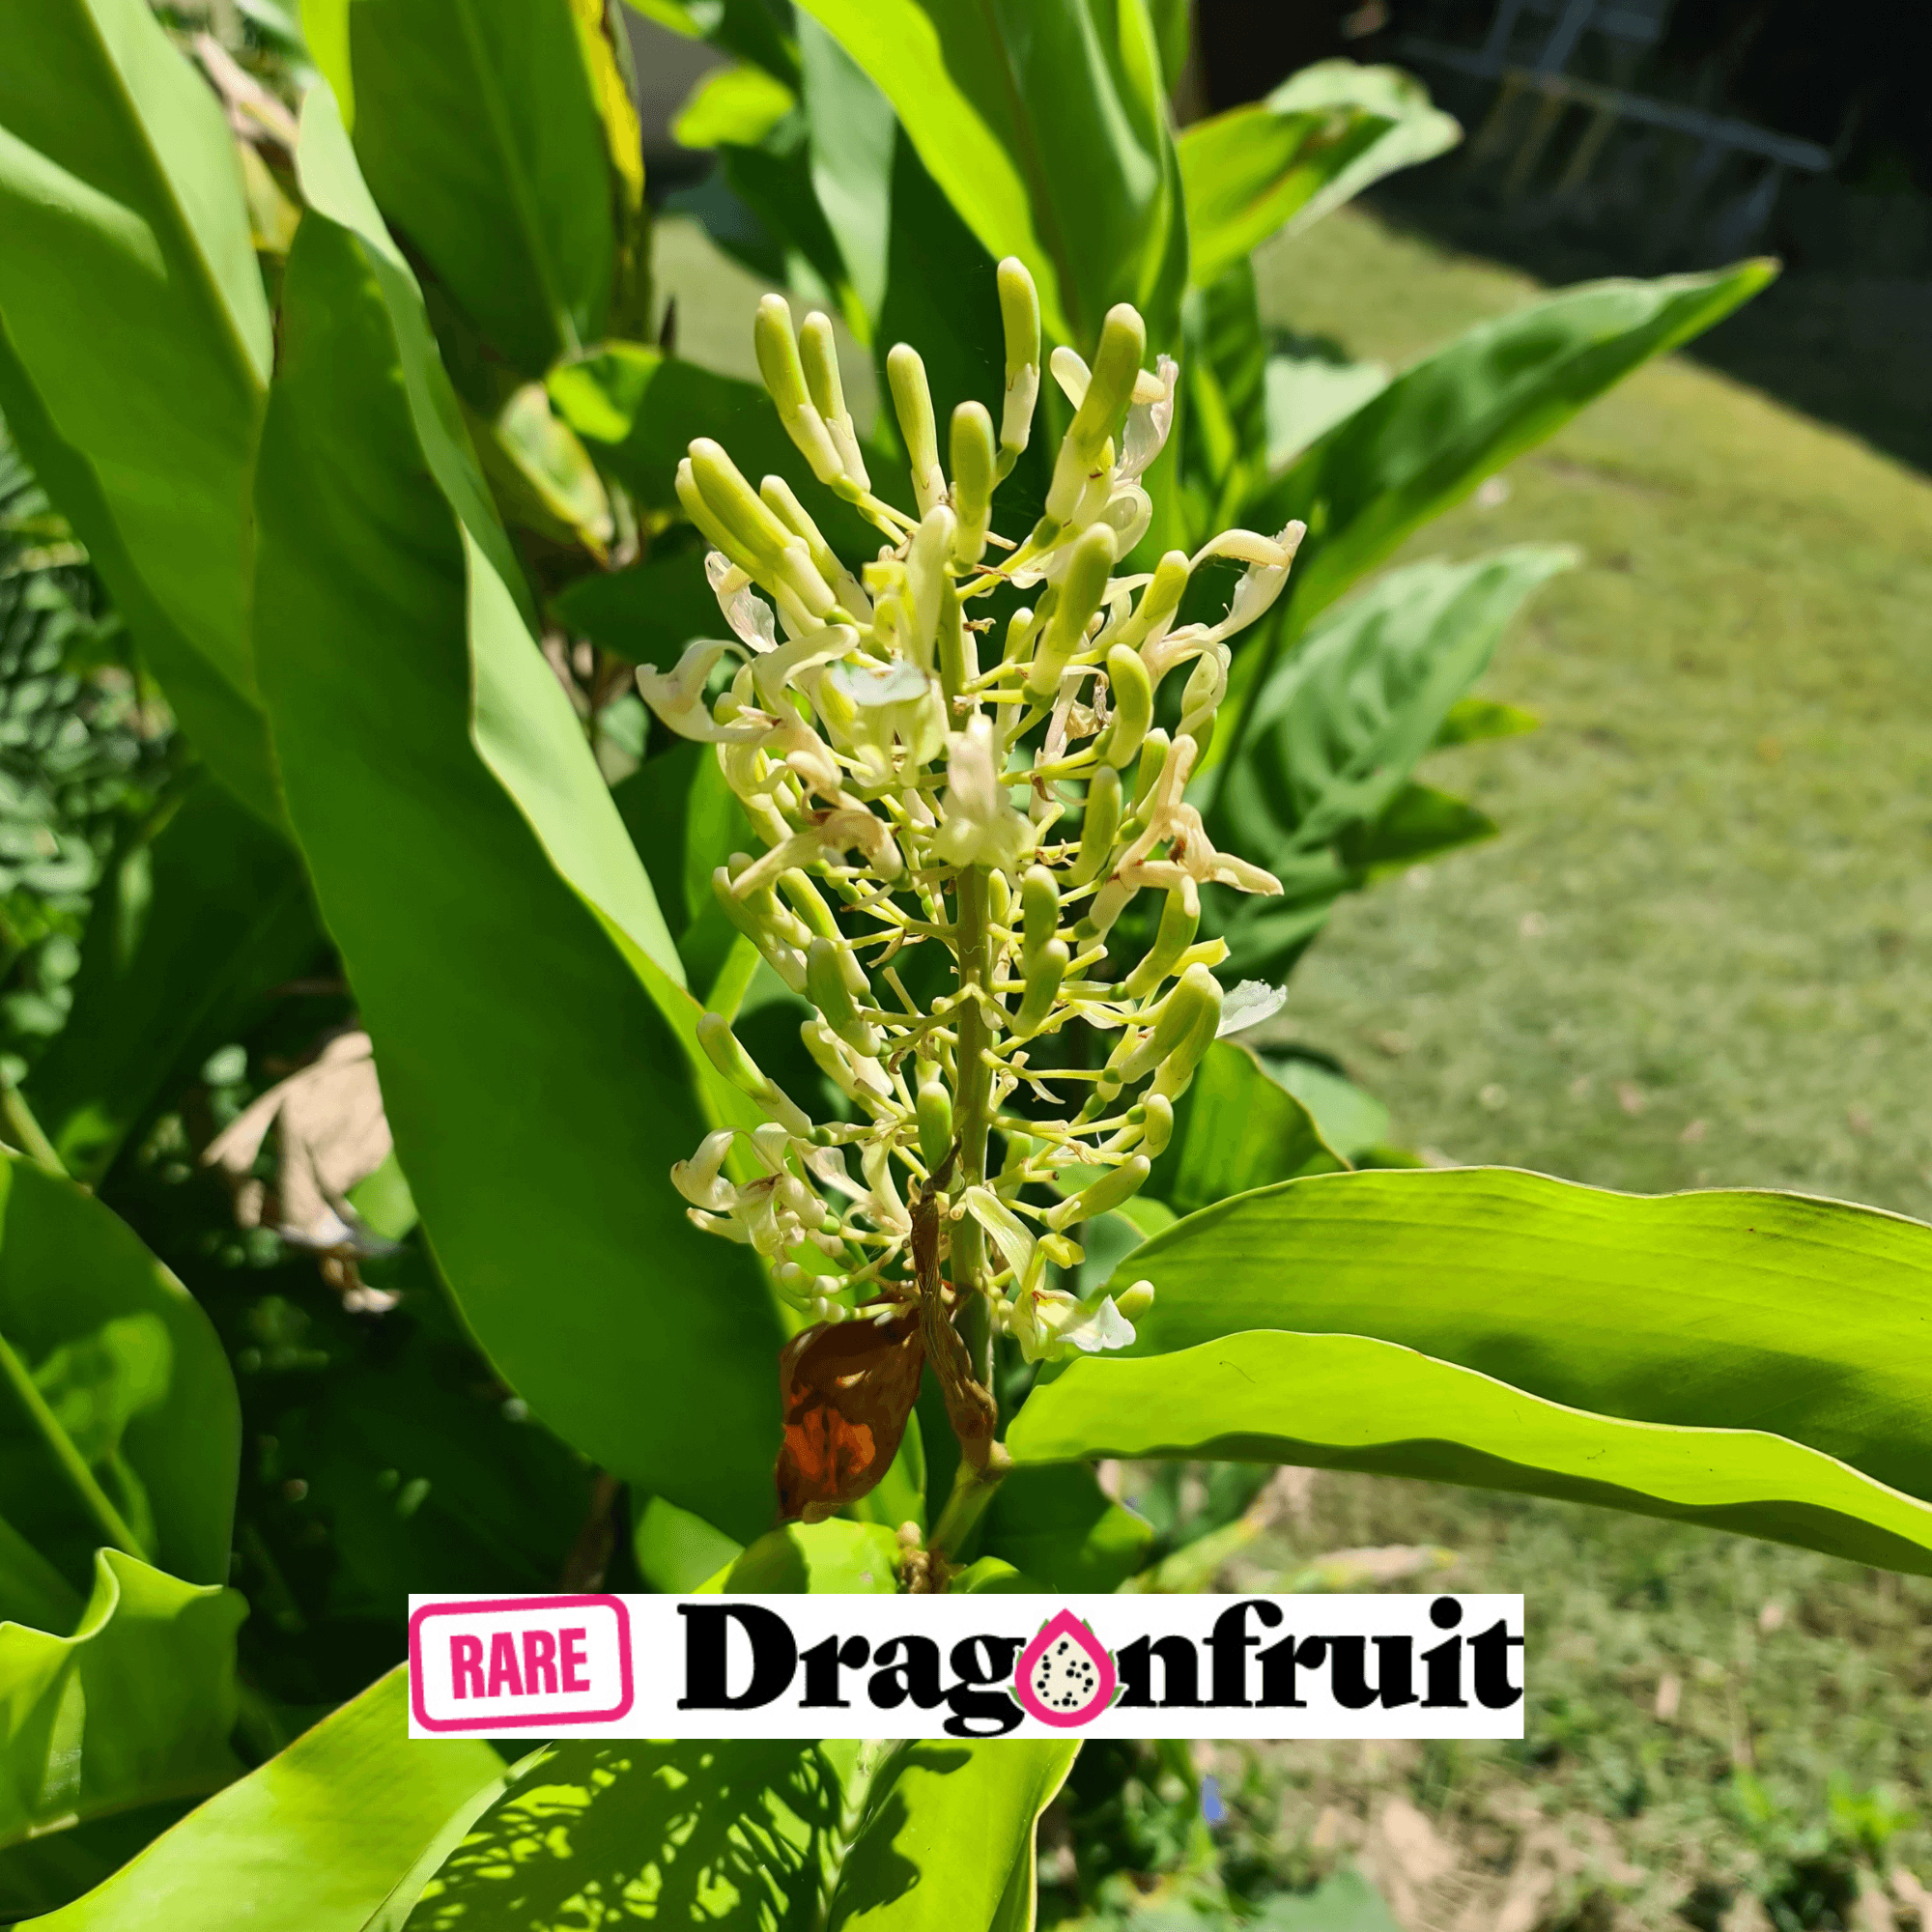 Alpinia Galanga - Find out all its Properties - HSN Blog